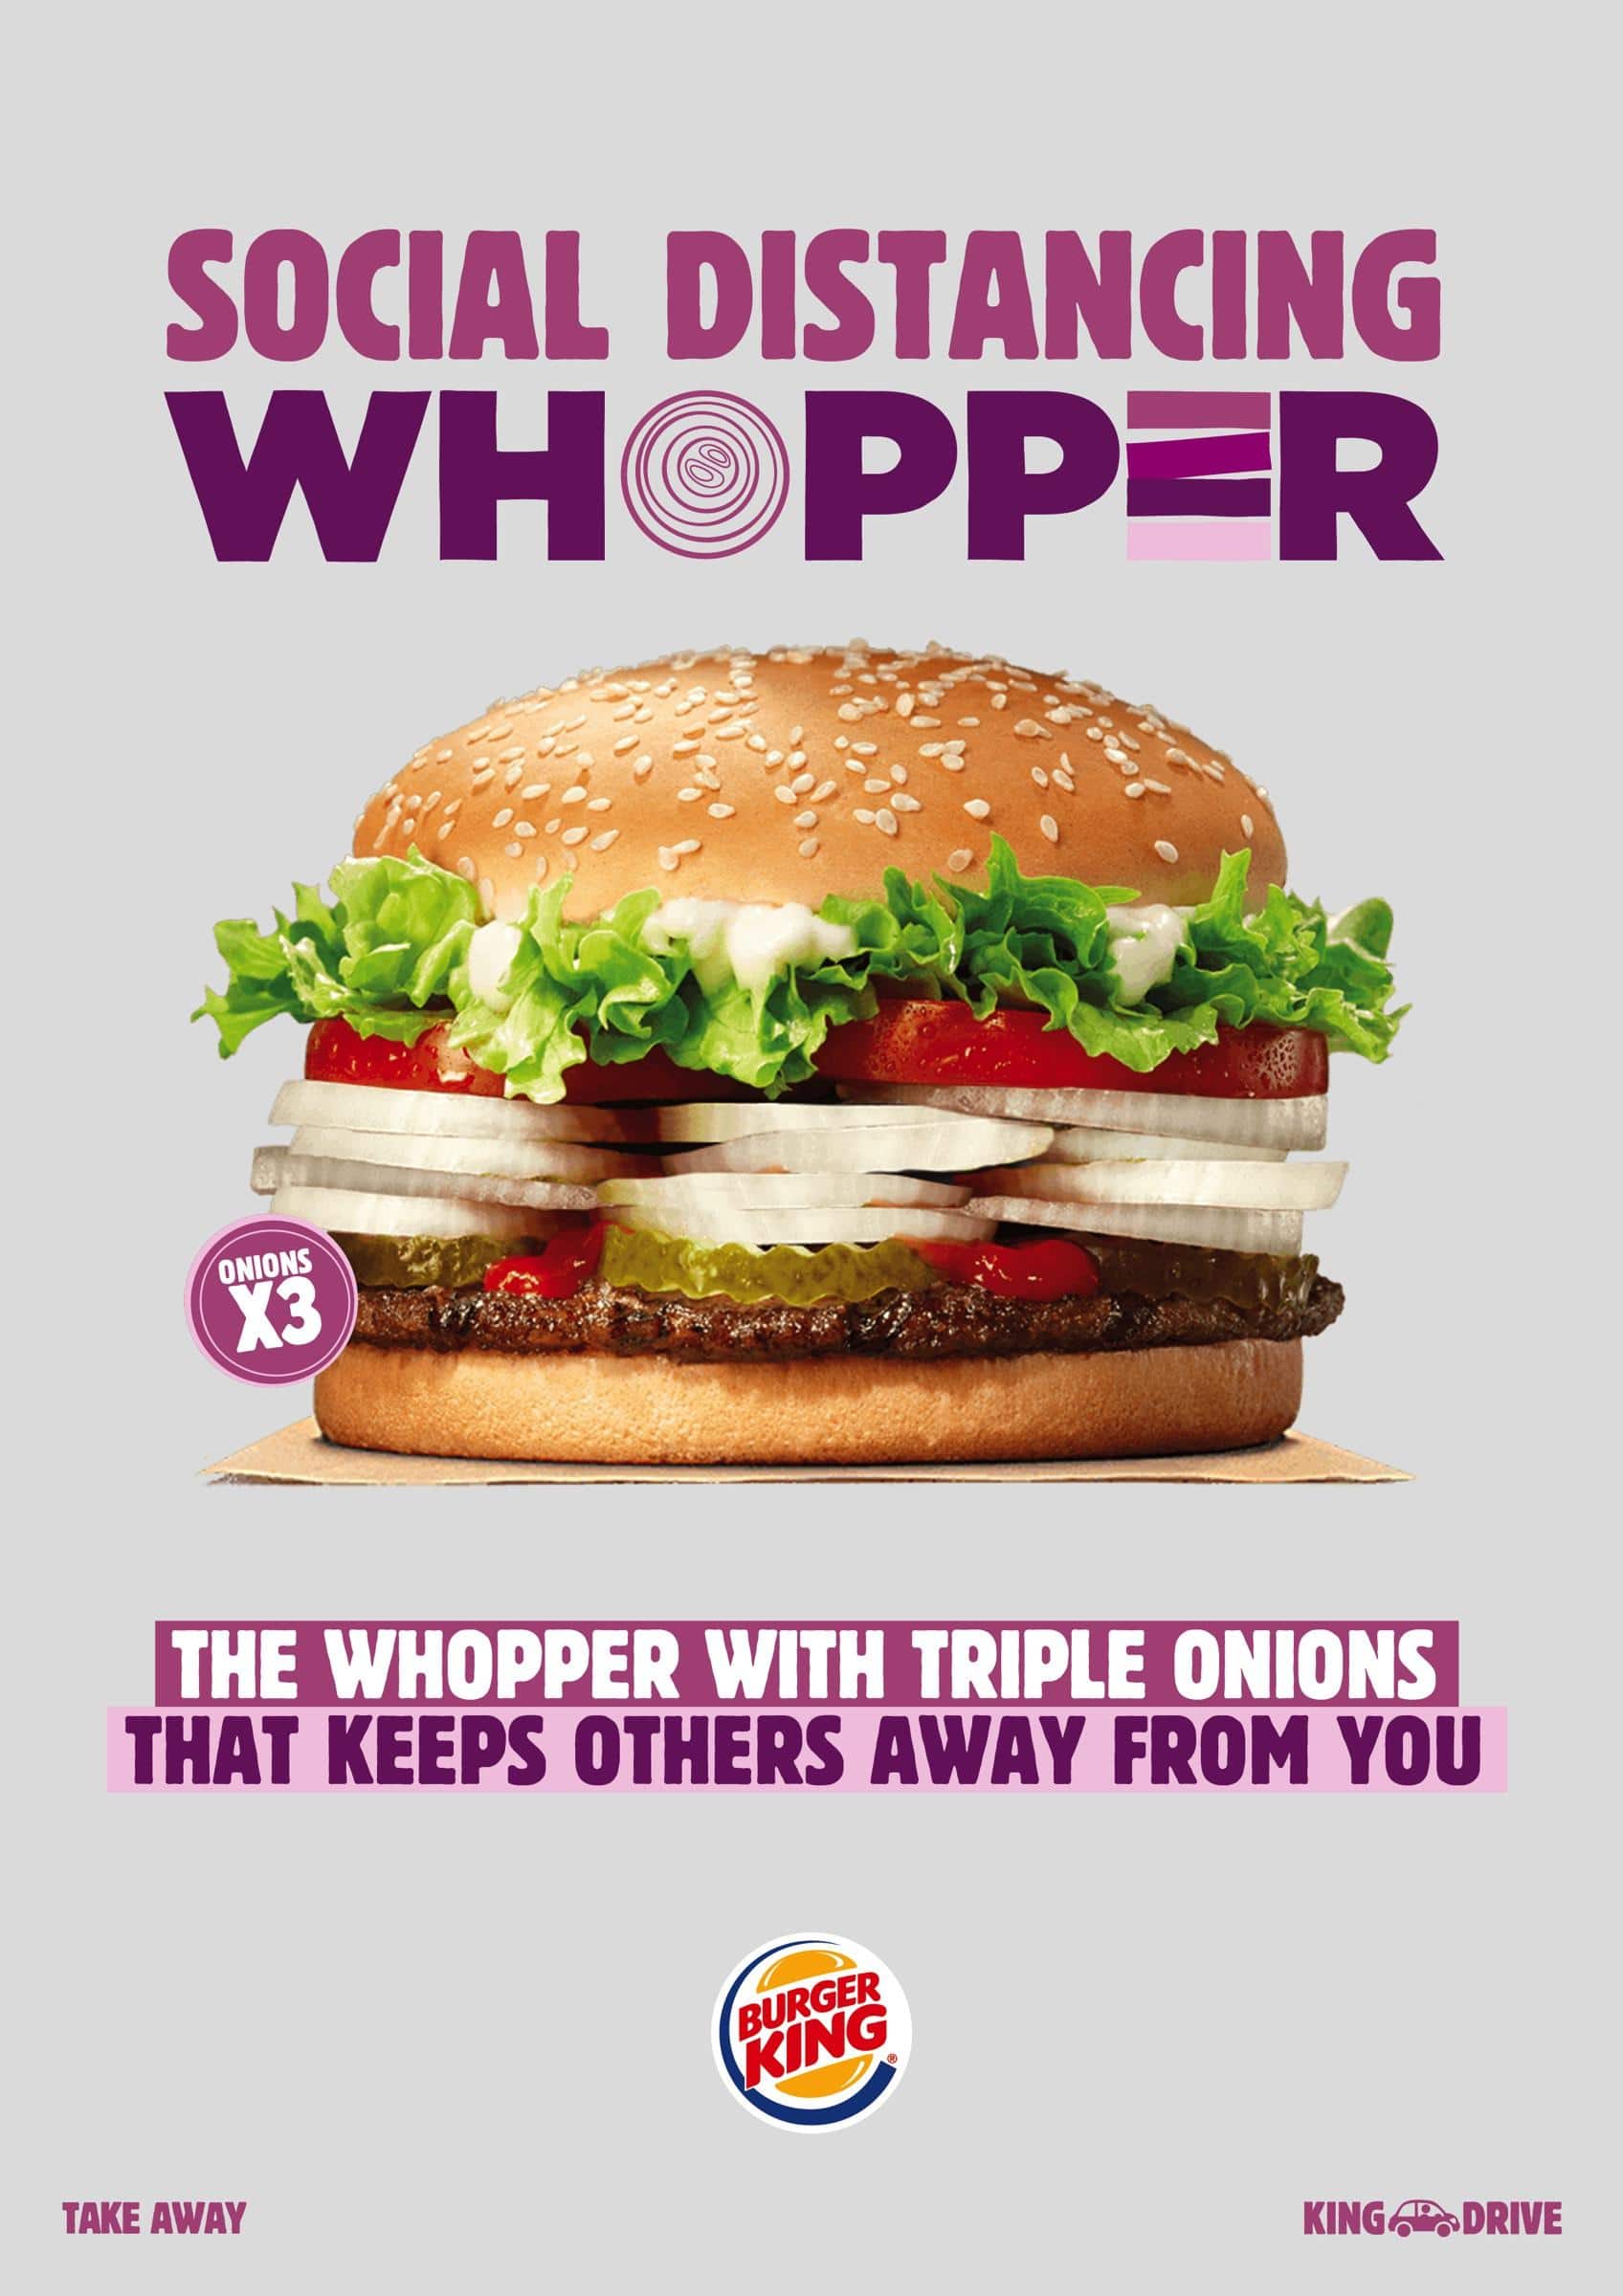 Burger King: The Social Distancing Whopper